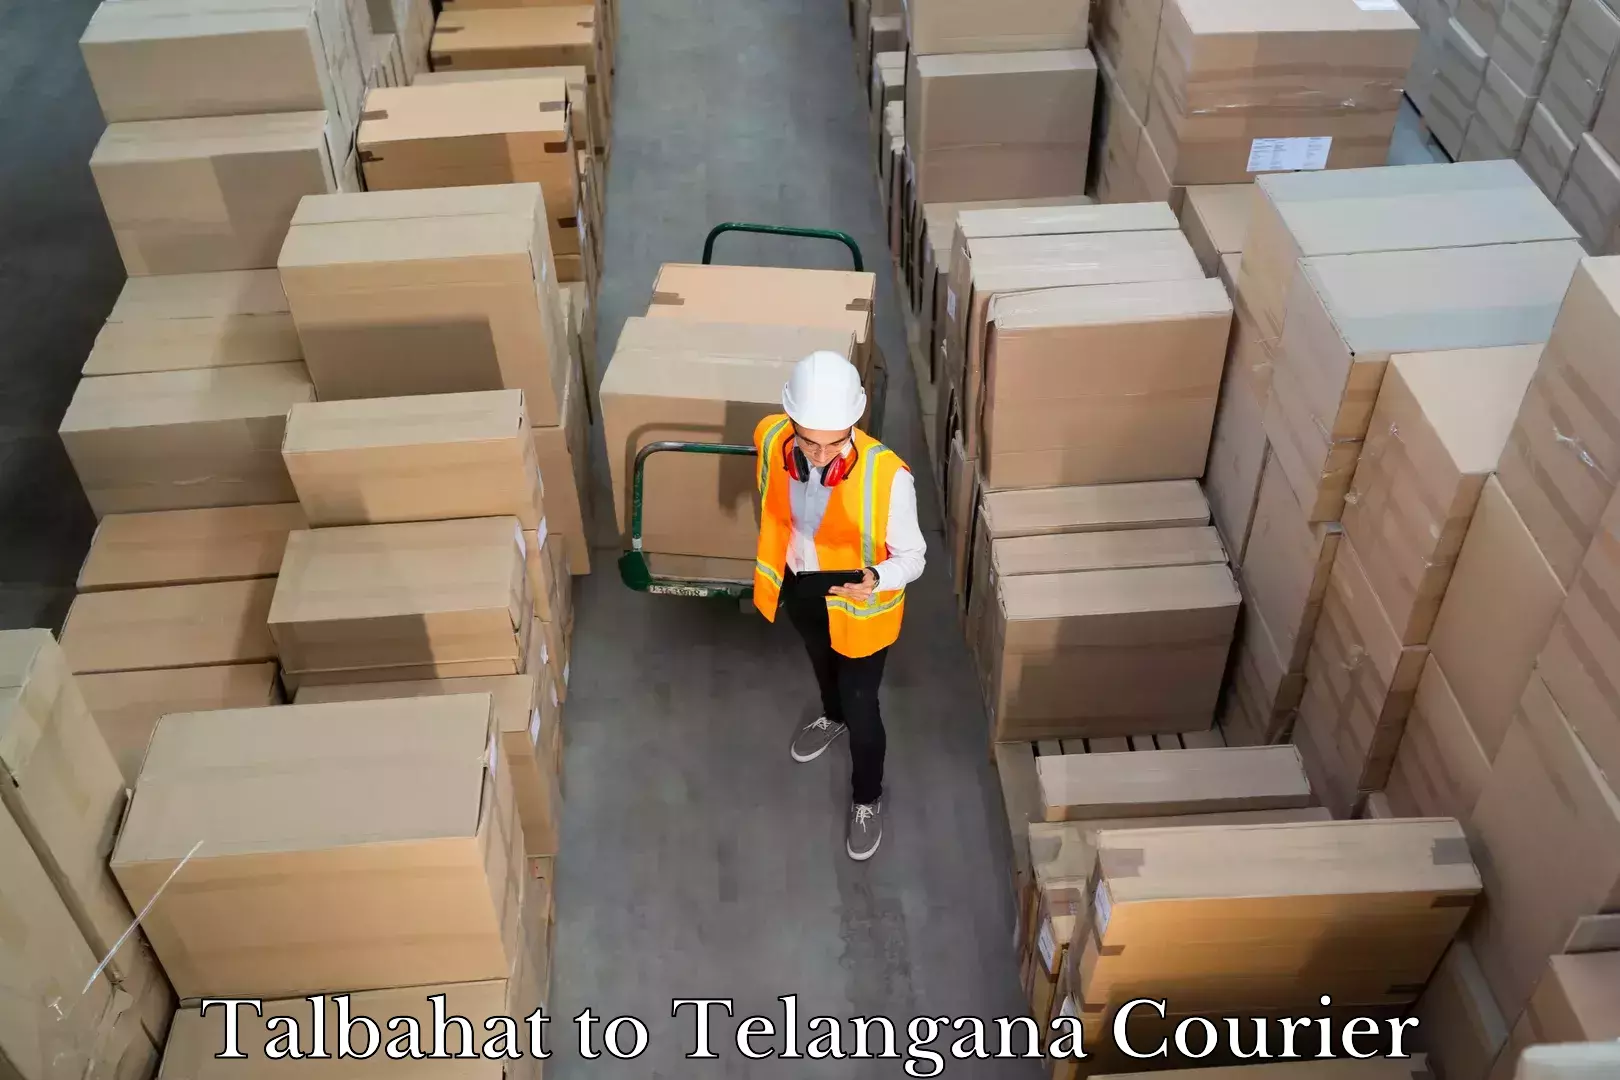 Luggage shipment specialists Talbahat to Bonakal